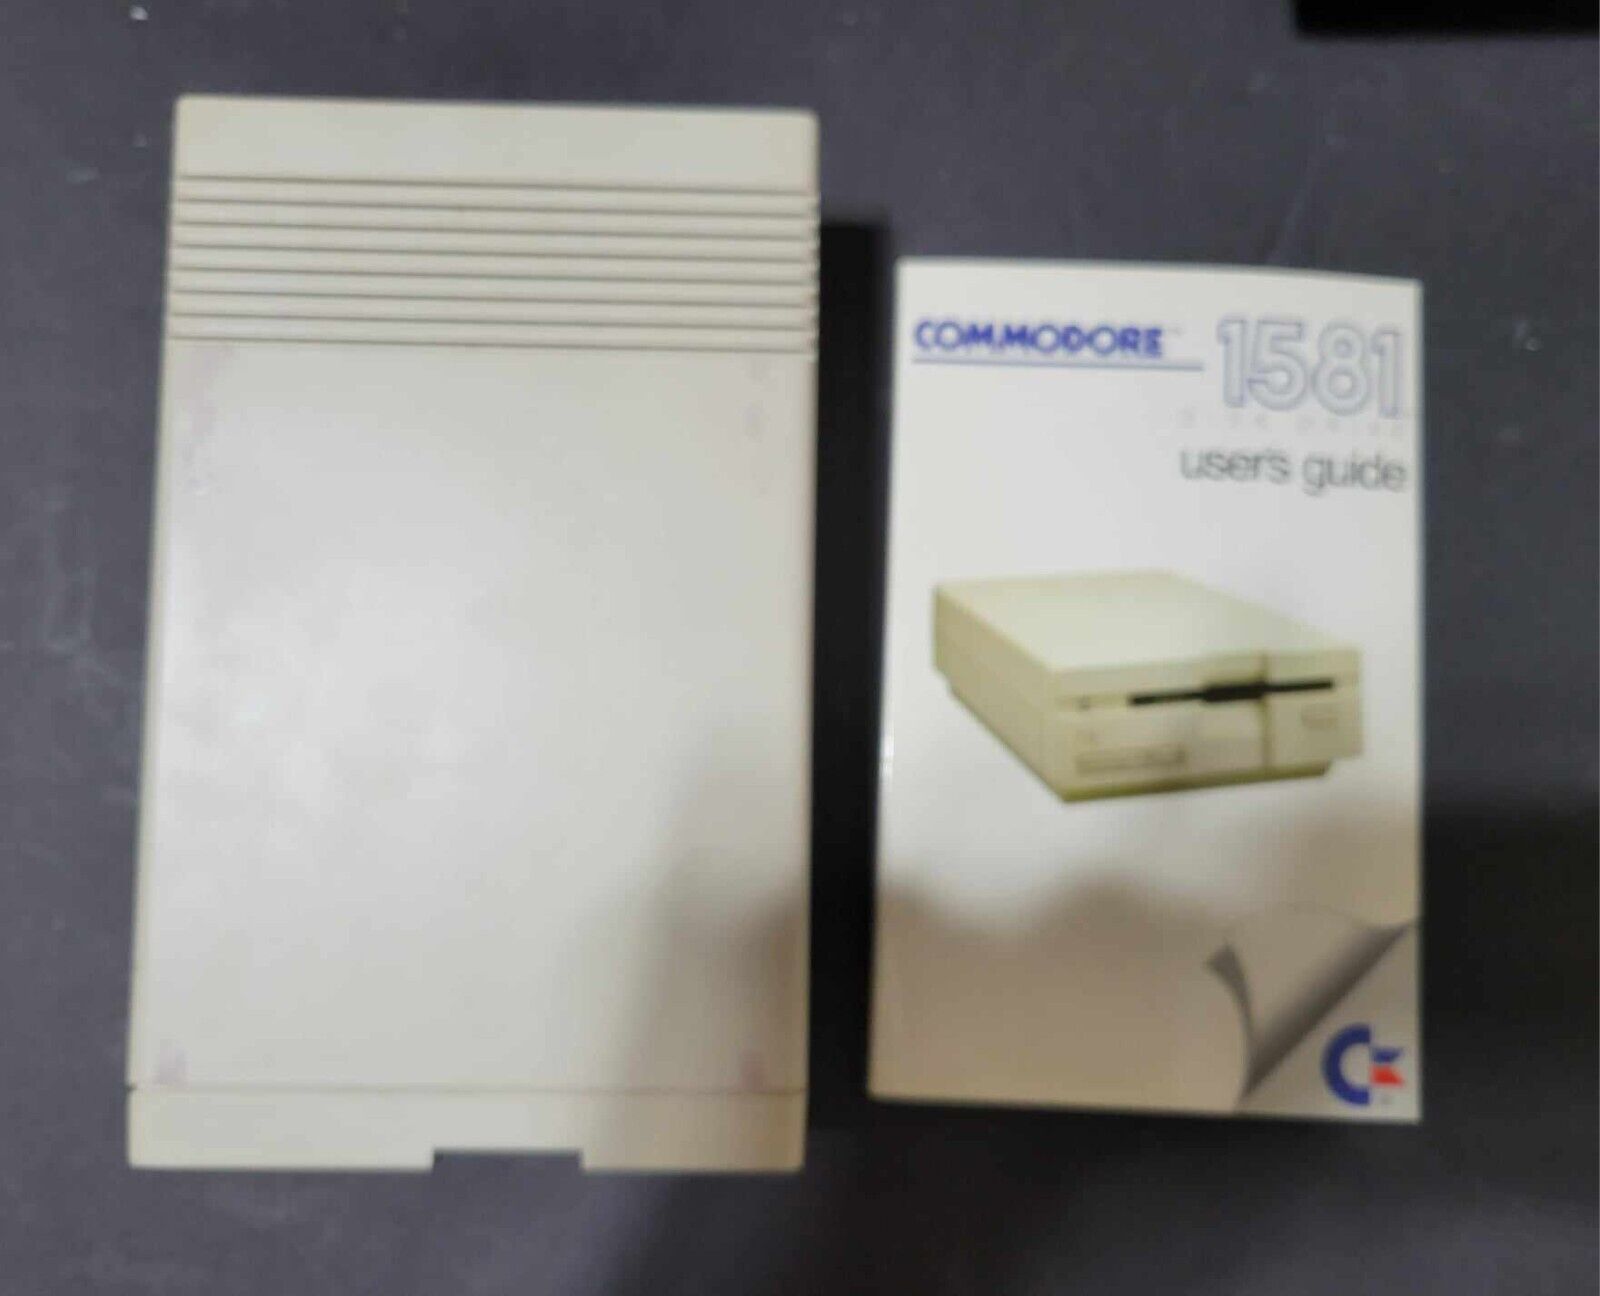 vintage Commodore 1571 Floppy Disk Drive (powers on)